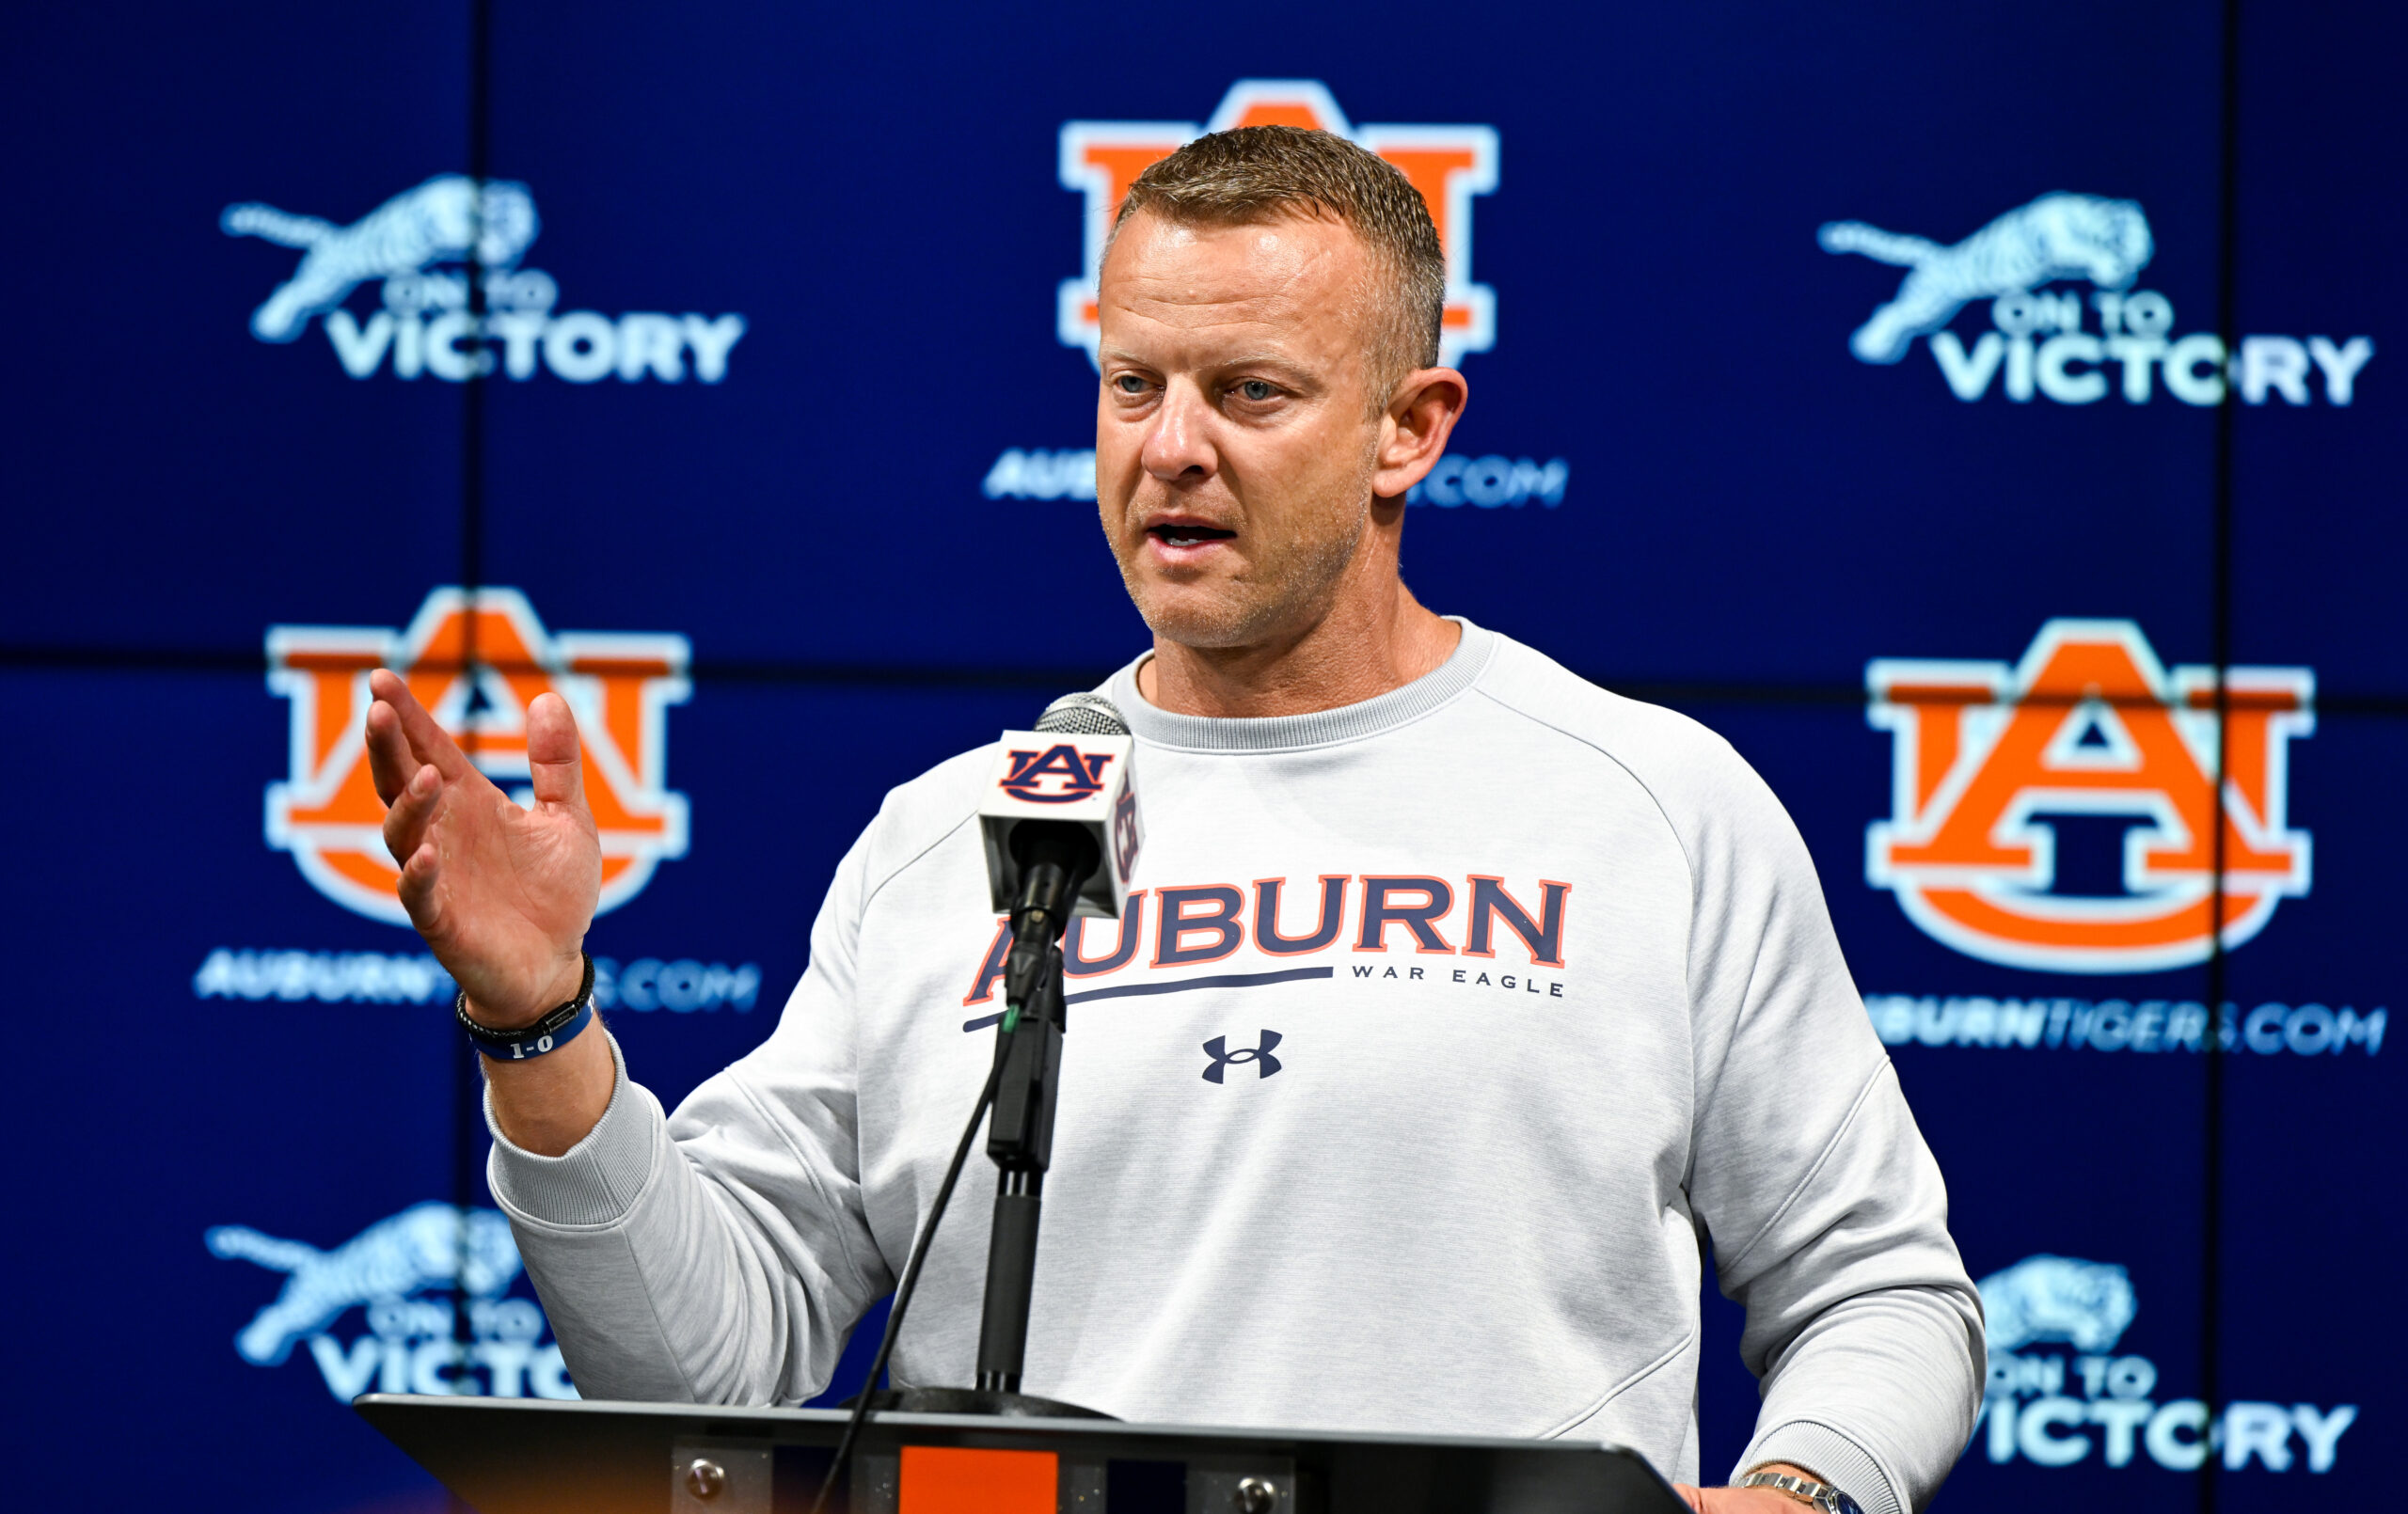 Ranking Possible Candidates for Auburn Job: